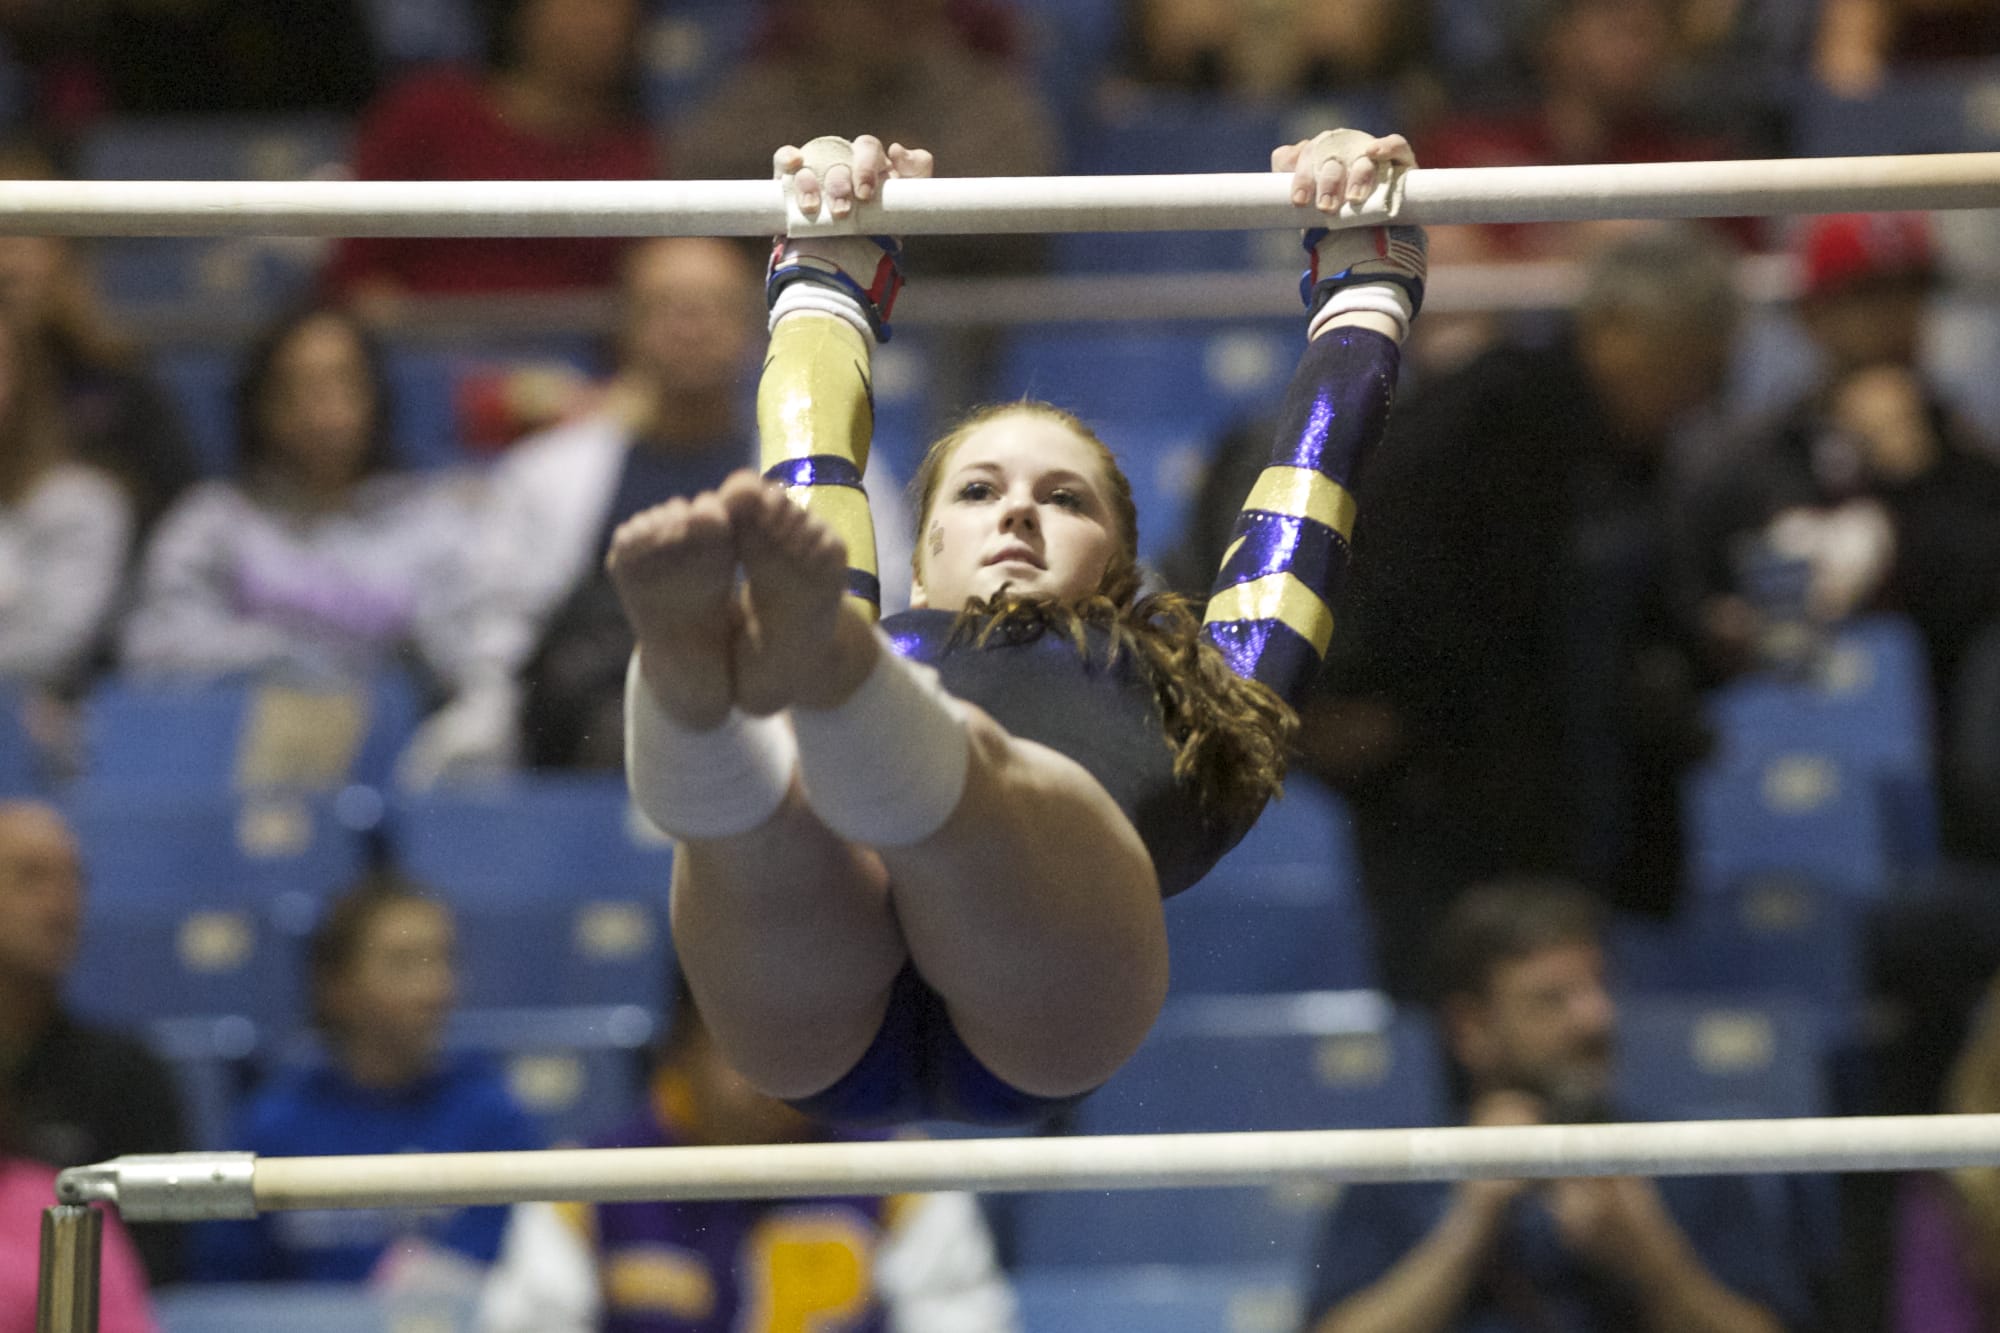 Columbia River's Katie Zink competes on the bars at the 3A state gymnastics meet in Tacoma on Friday.